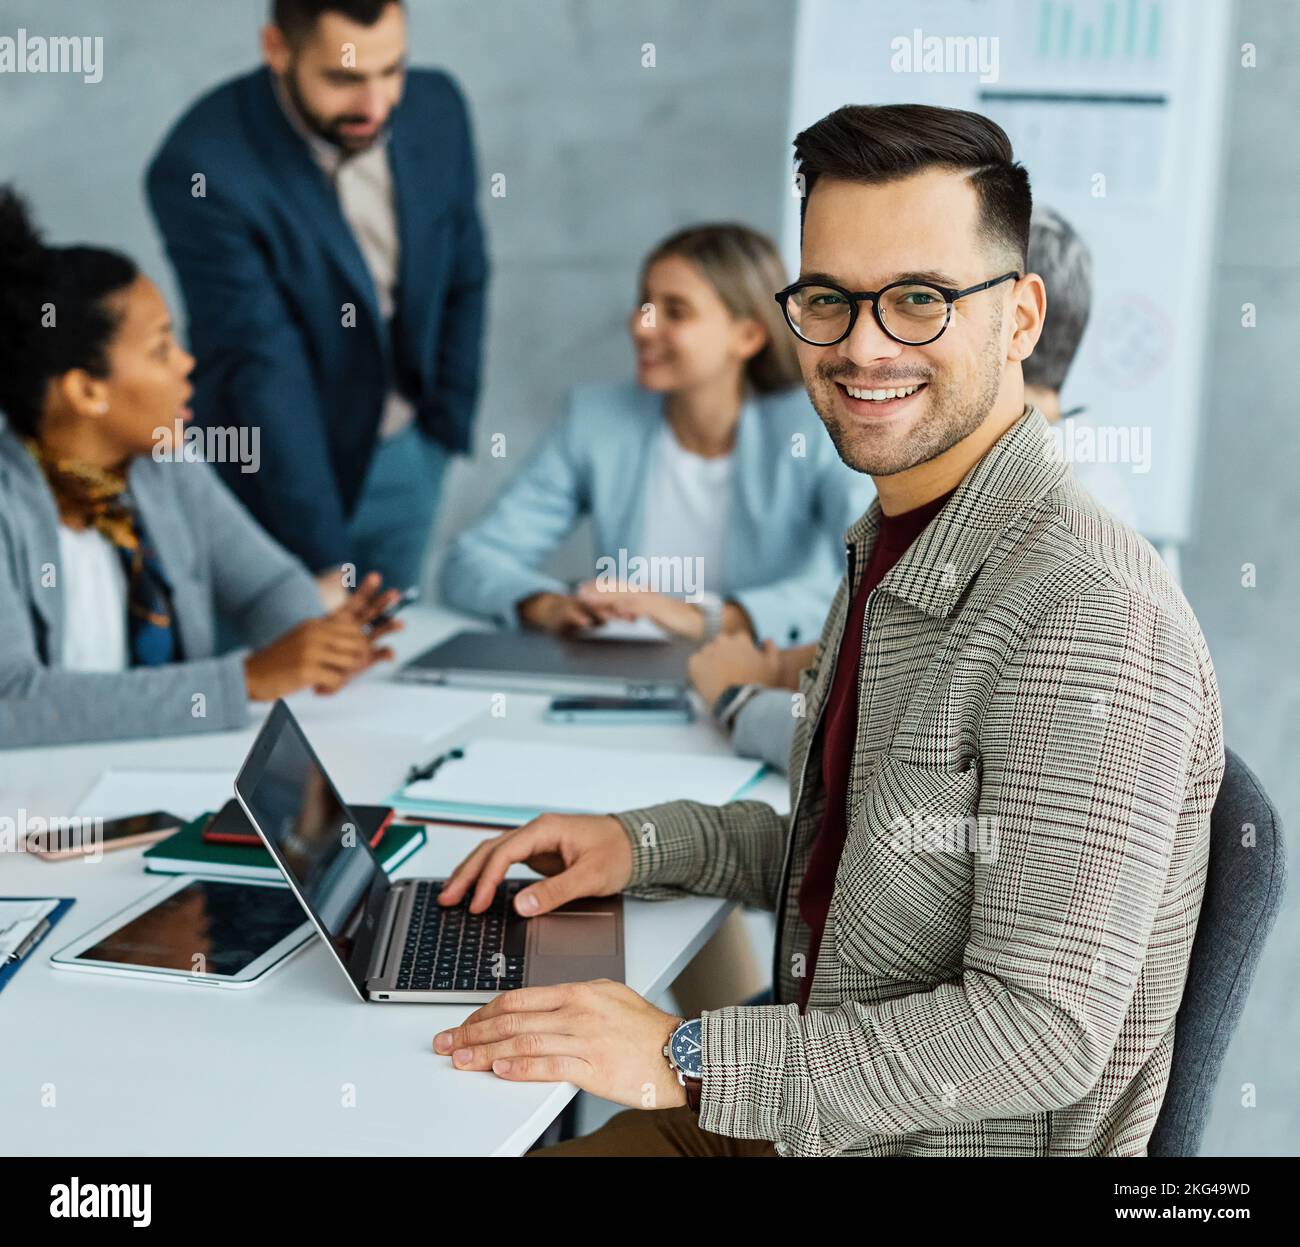 young business people meeting office teamwork group whiteboard presentation seminar man businesswoman startup creative training portrait Stock Photo